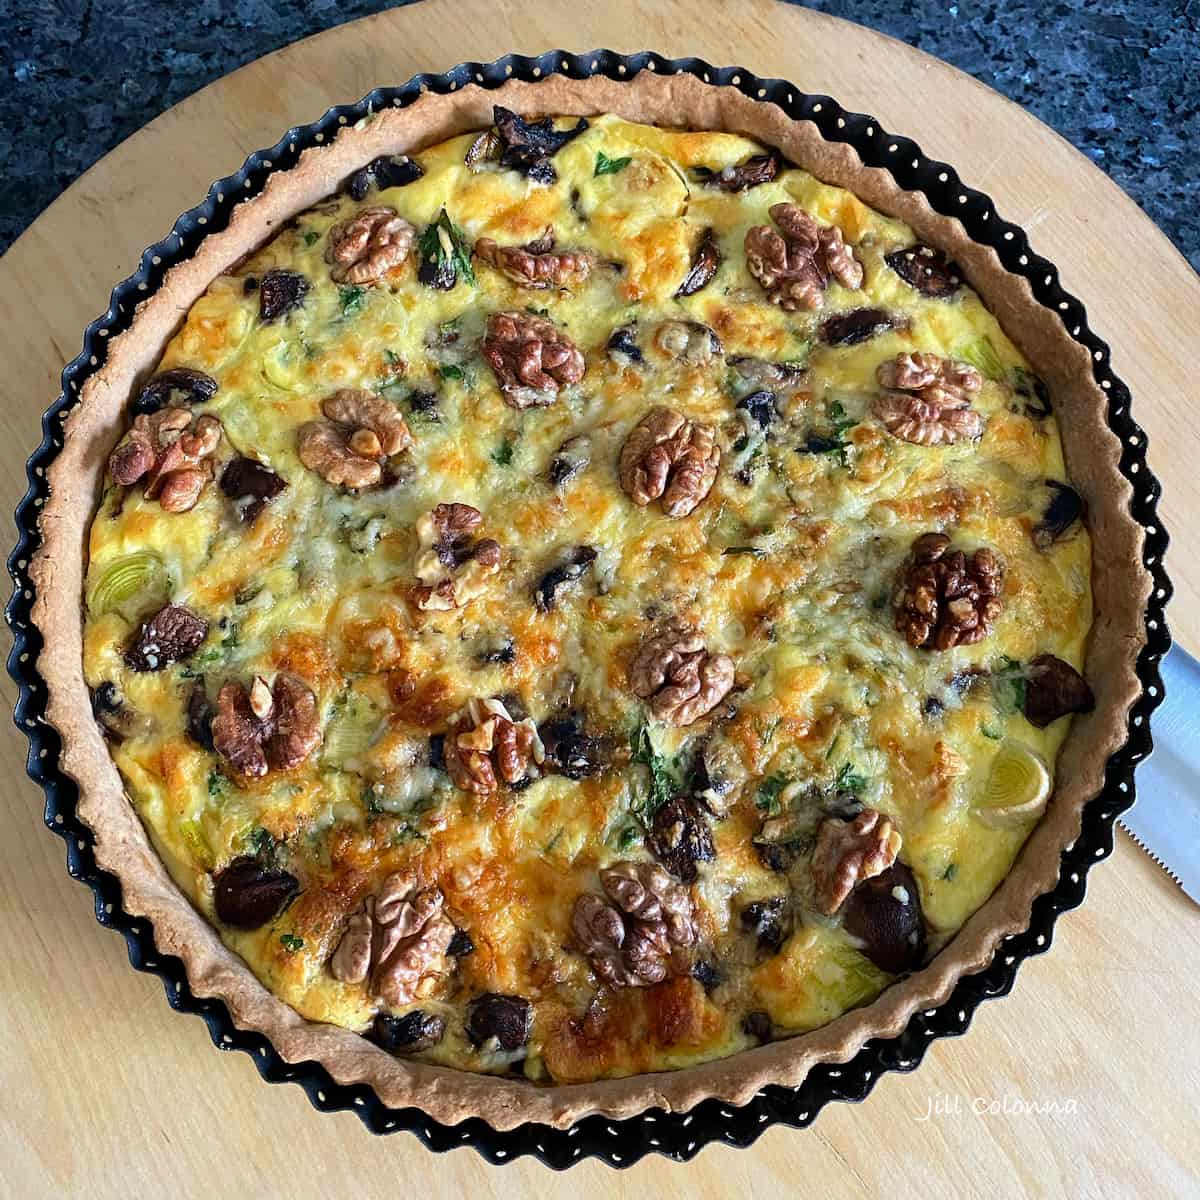 large round tart with pumpkin, mushrooms and topped with walnuts